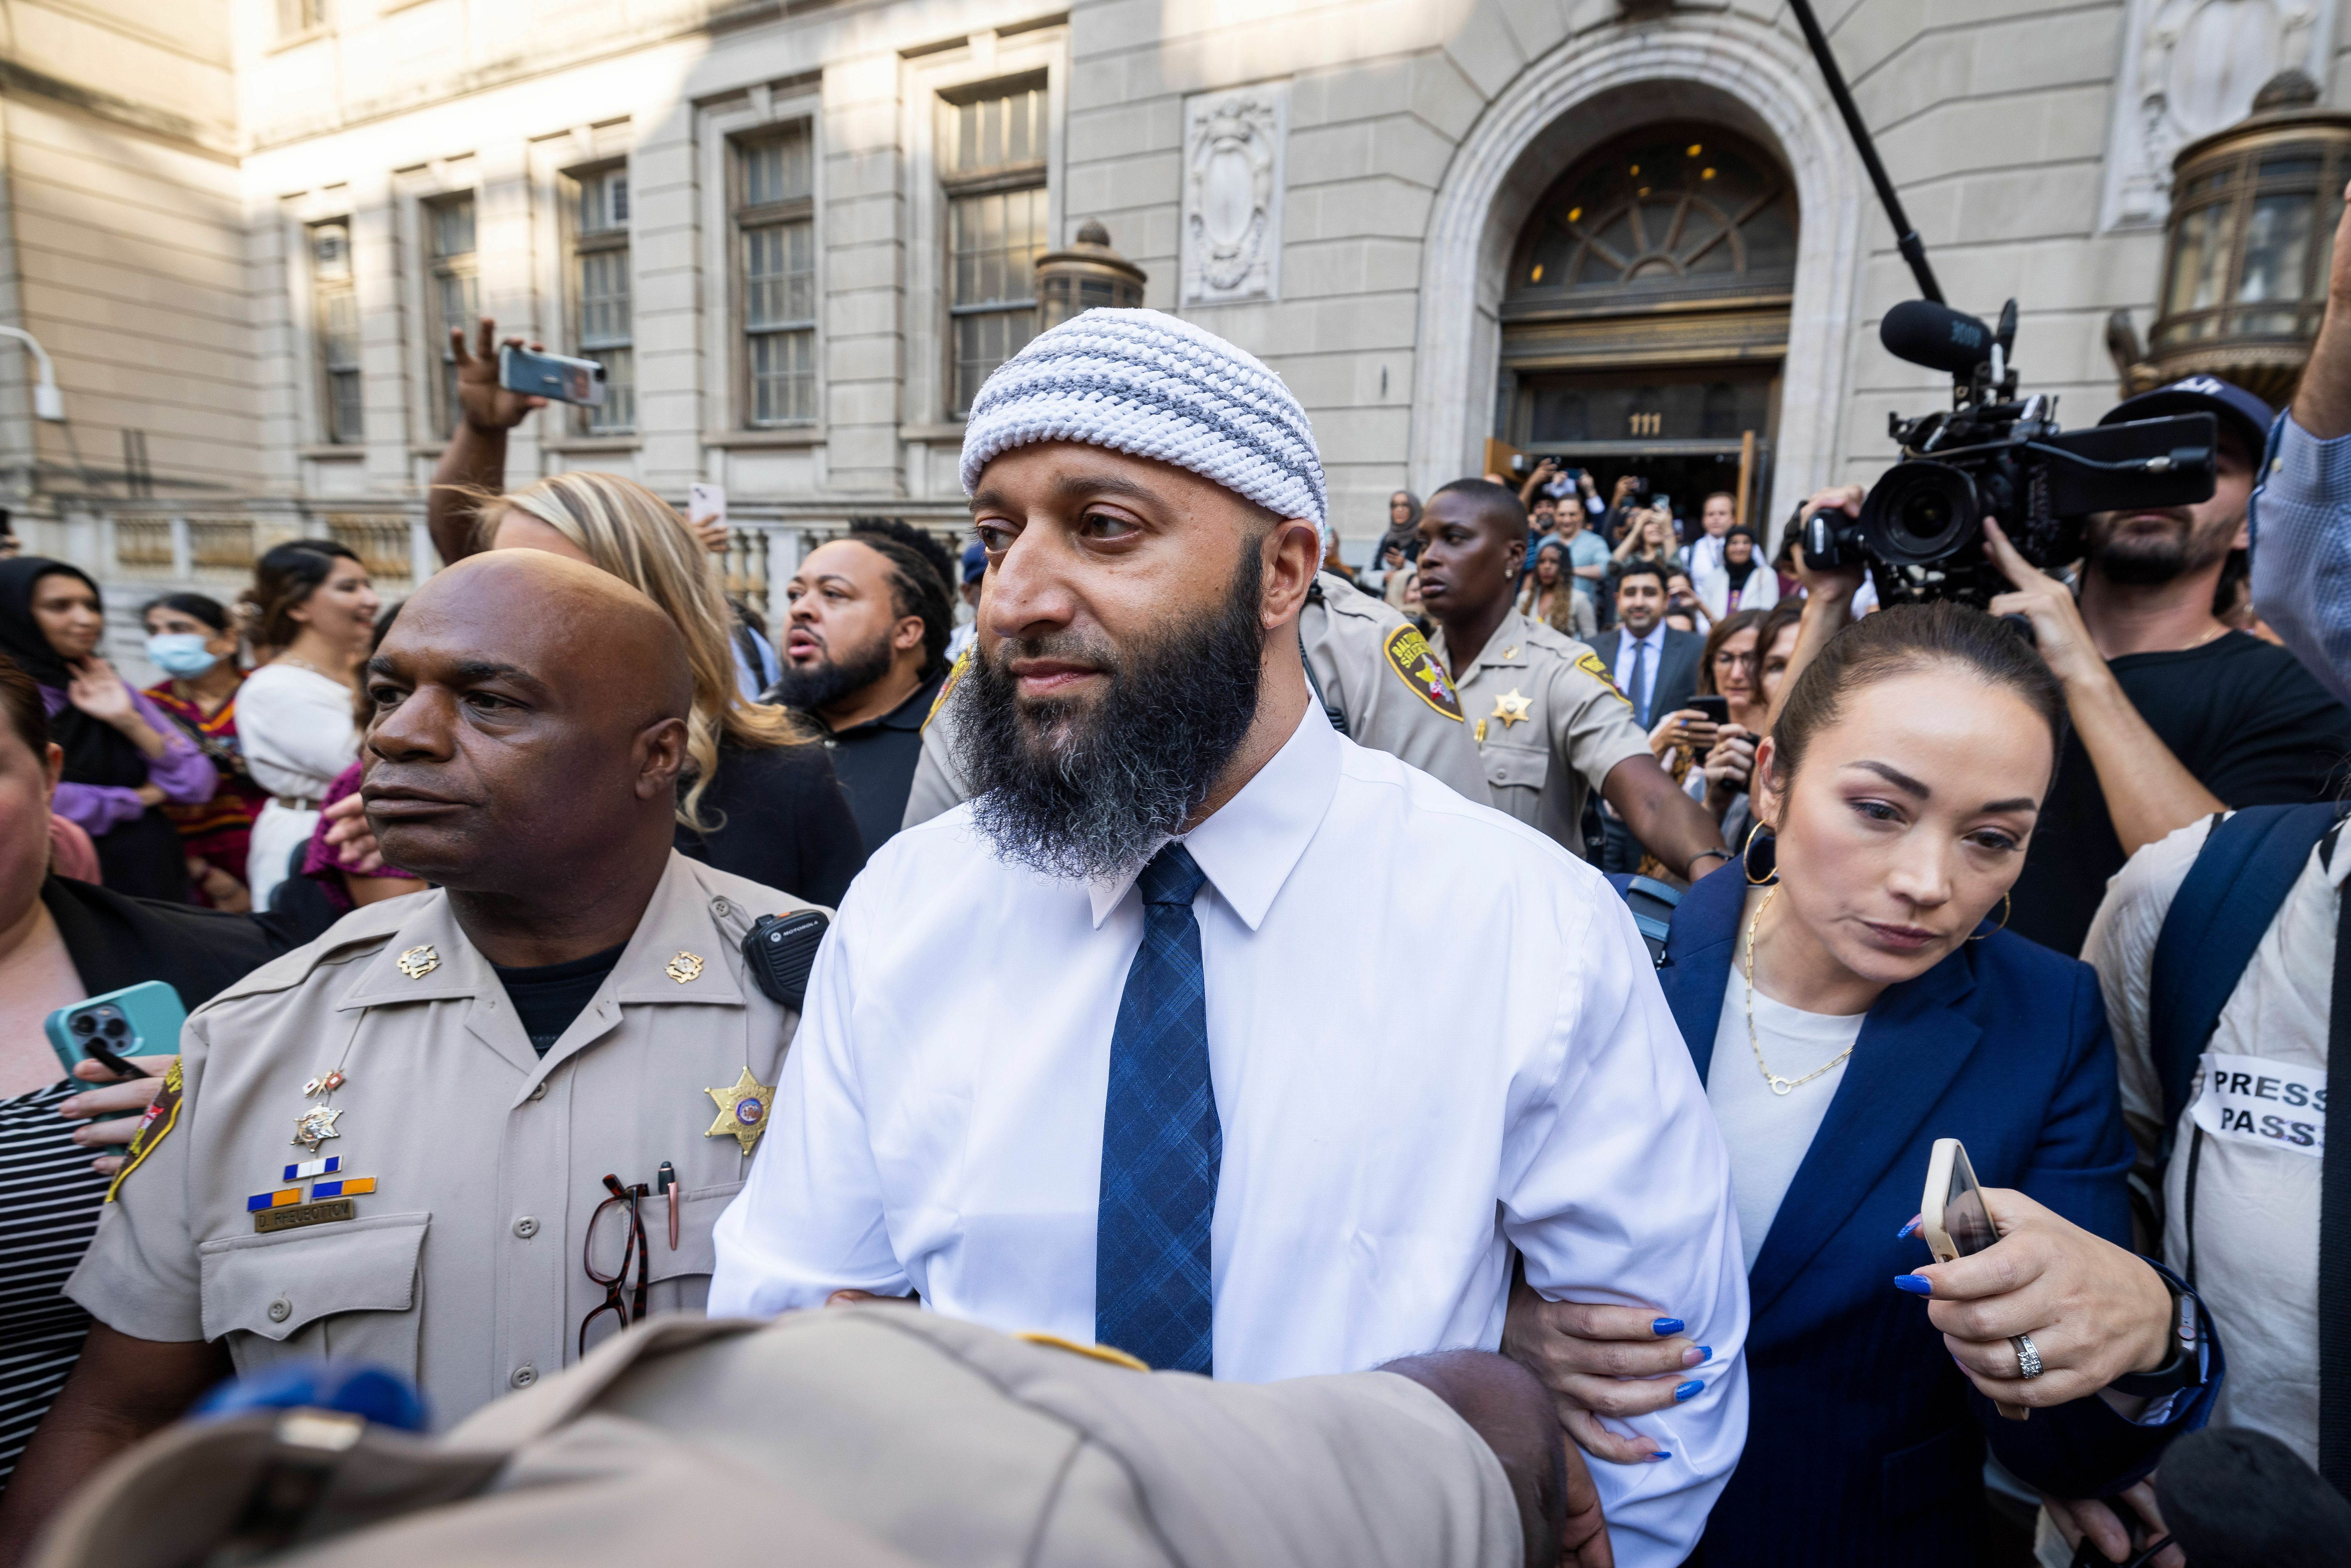 Adnan Syed walks down the steps of the courthouse, surrounded by press microphones as his lawyer stands next to him.